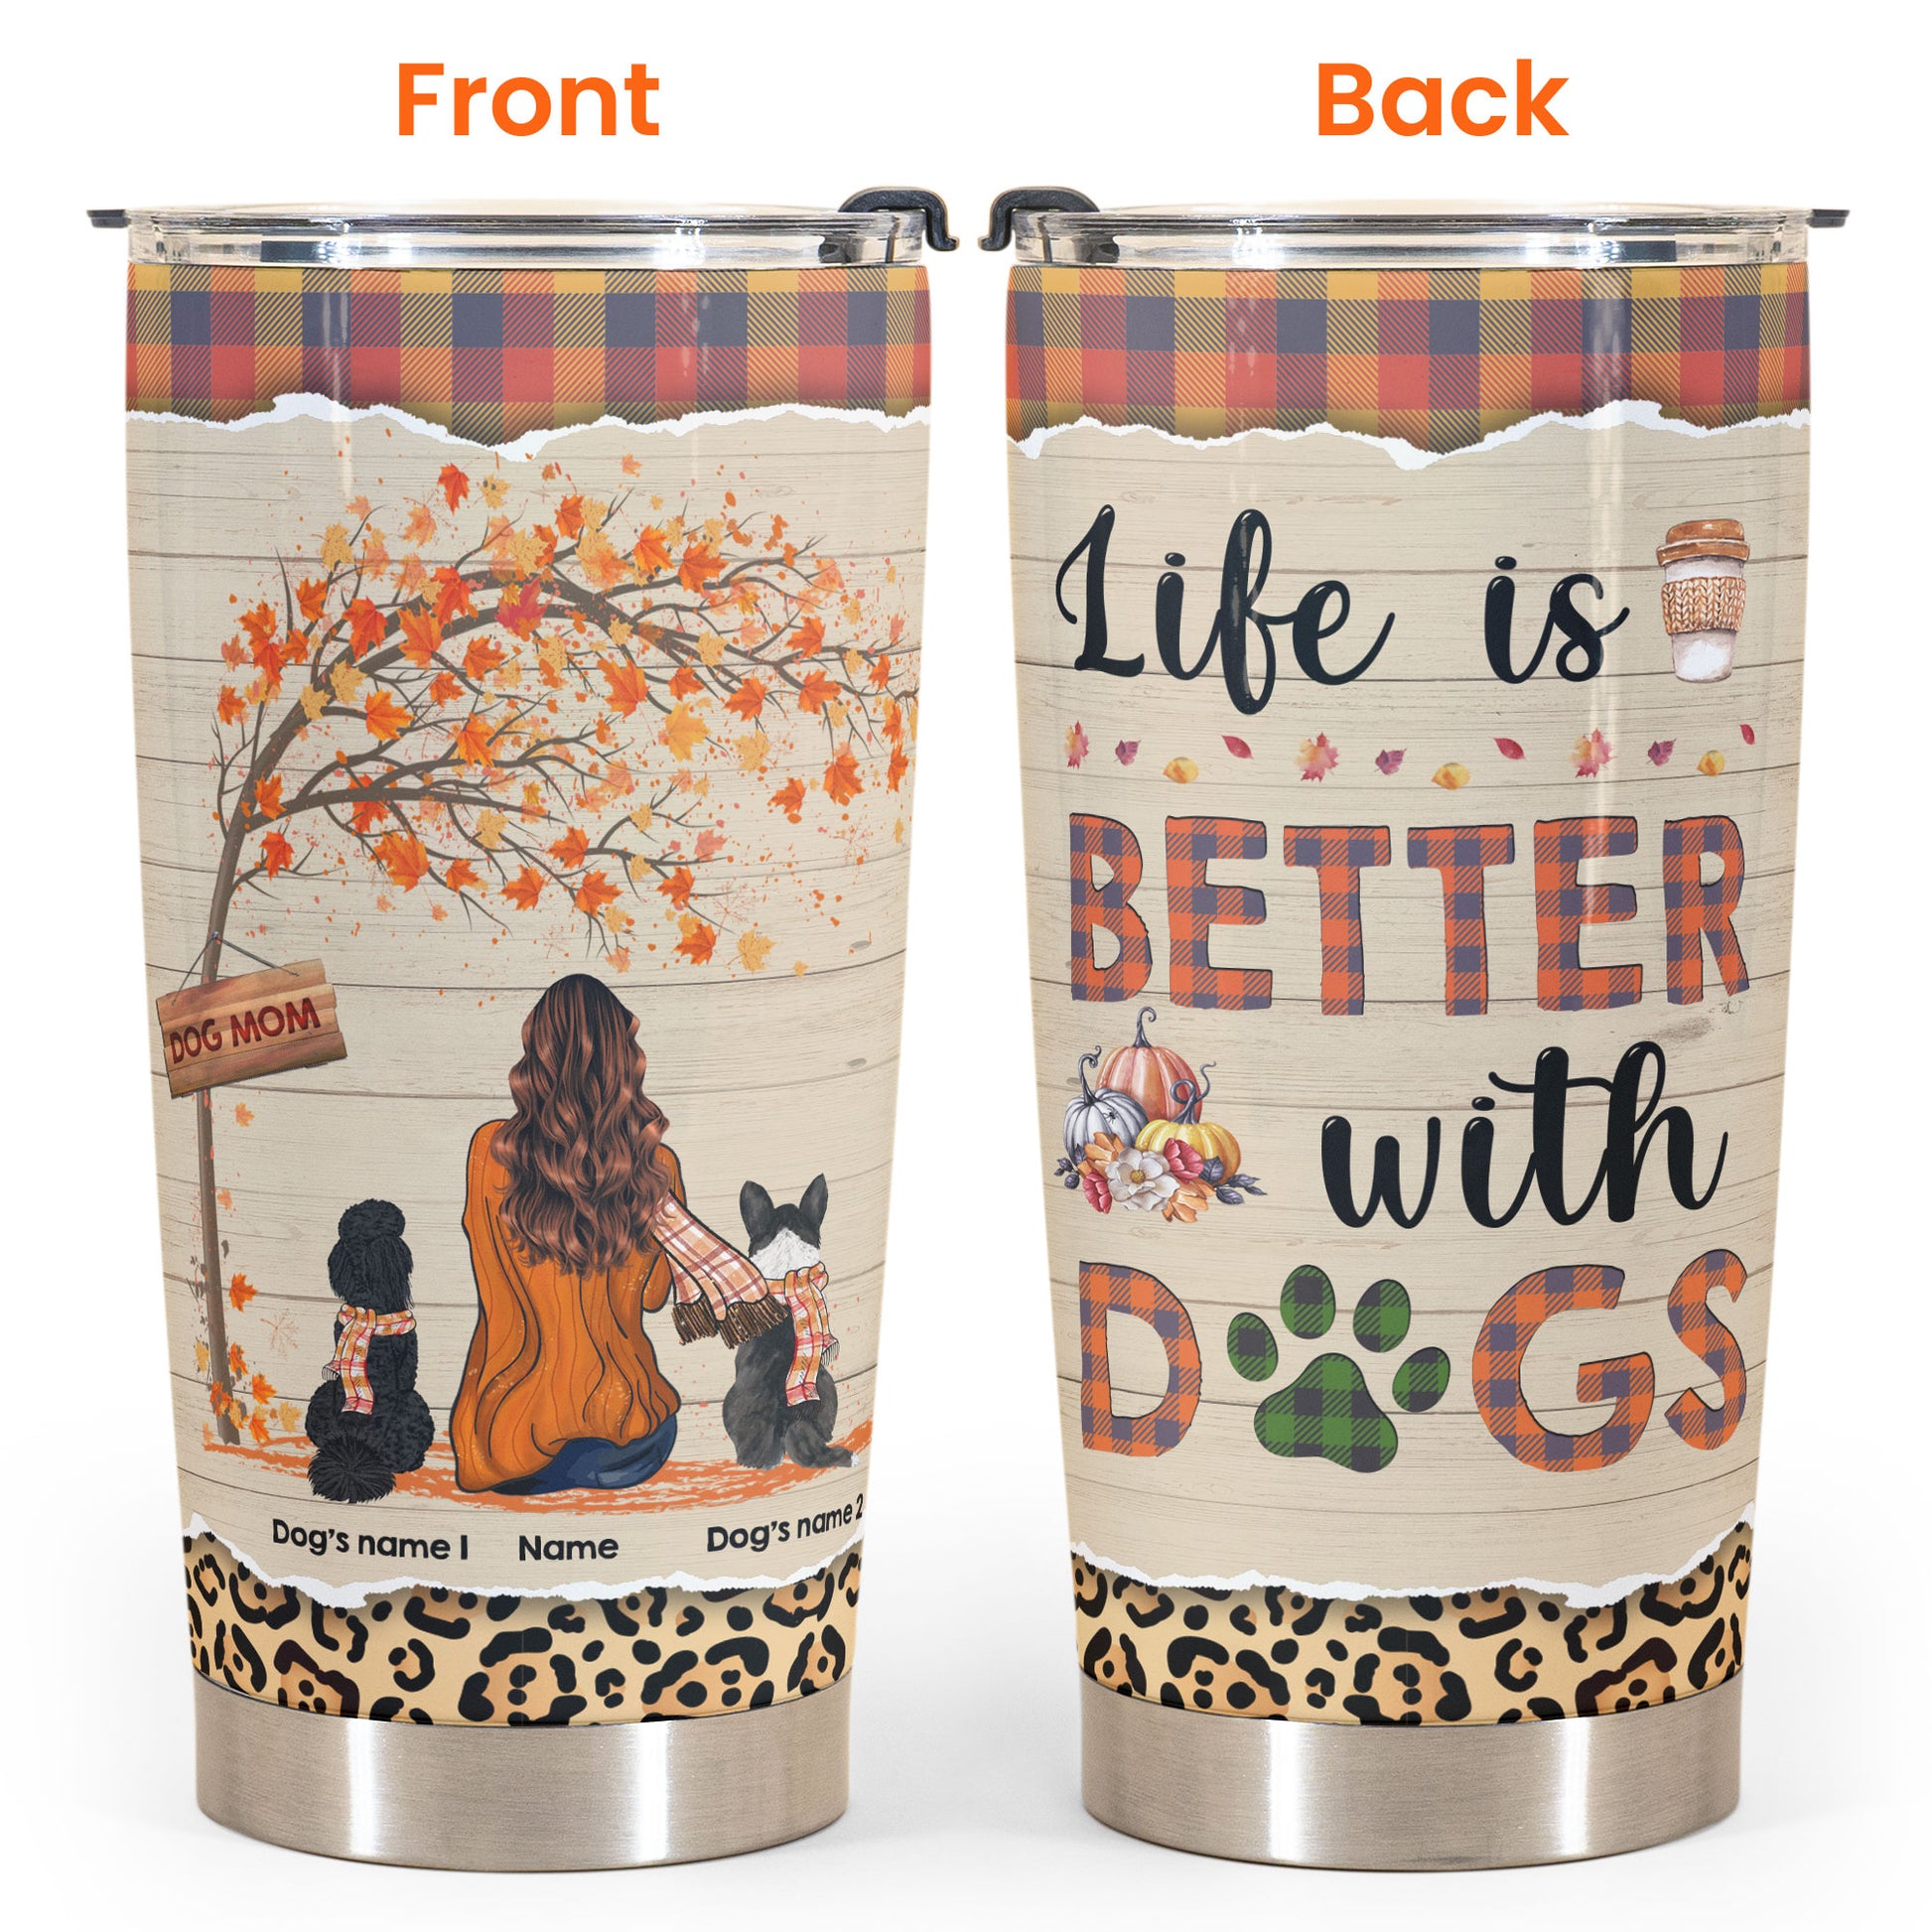 Life Is Better With Dogs - Personalized Tumbler Cup - Fall Season Gift For Dog Lover - Girl Back and Dog